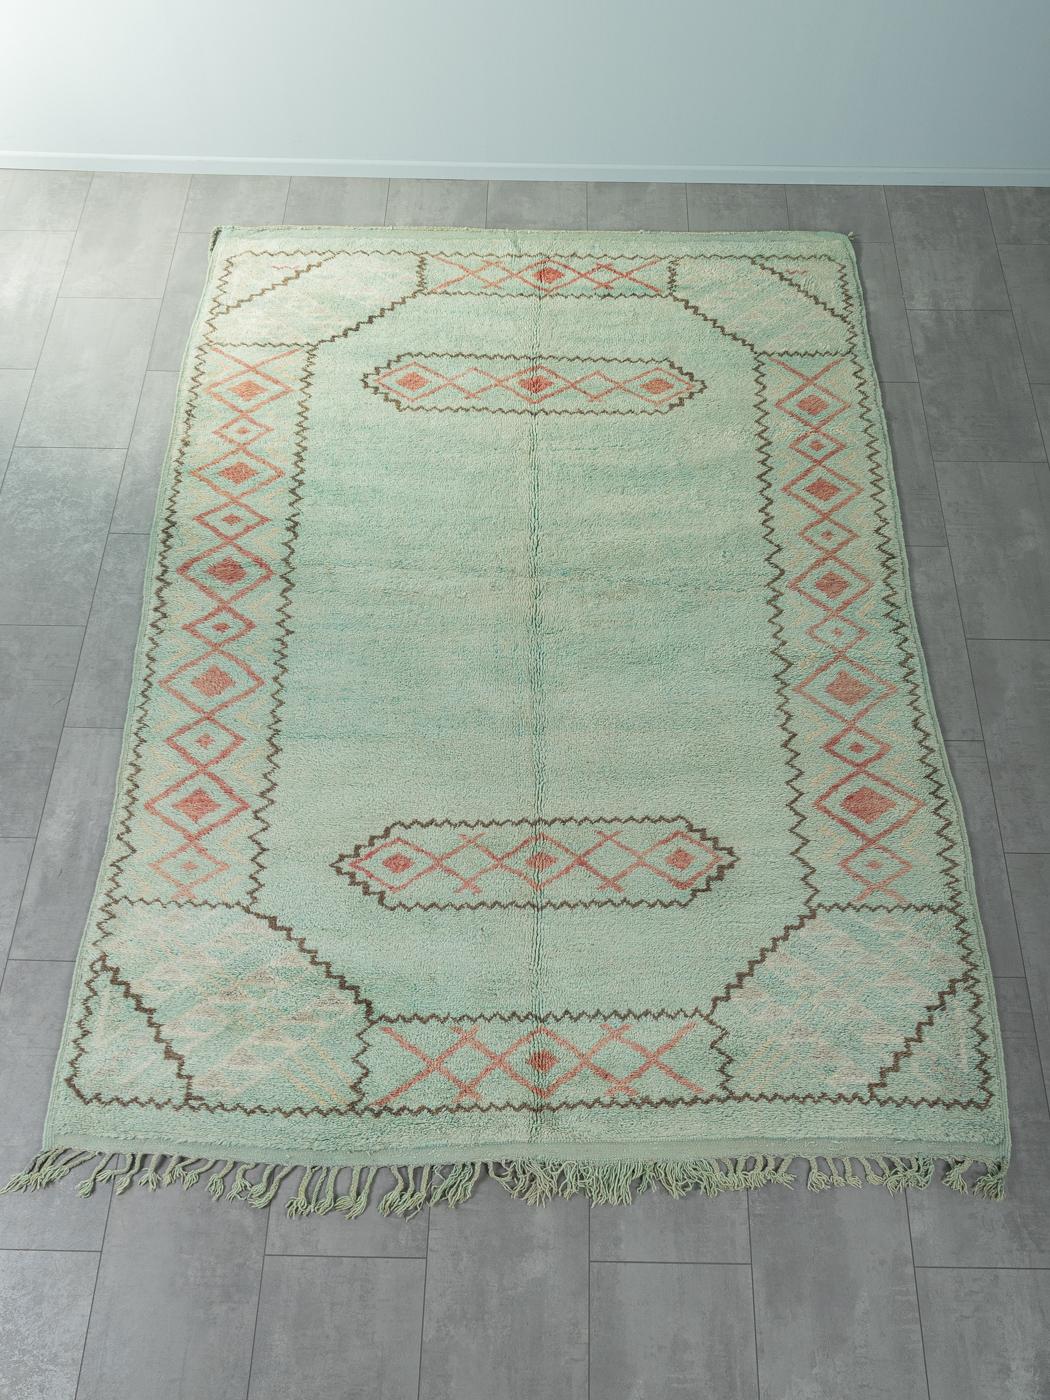 This Vintage Beni Mrirt is a 100 % wool rug – soft and comfortable underfoot. Our Berber rugs are handmade, one knot at a time. Each of our Berber rugs is a long-lasting one-of-a-kind piece, created in a sustainable manner with local